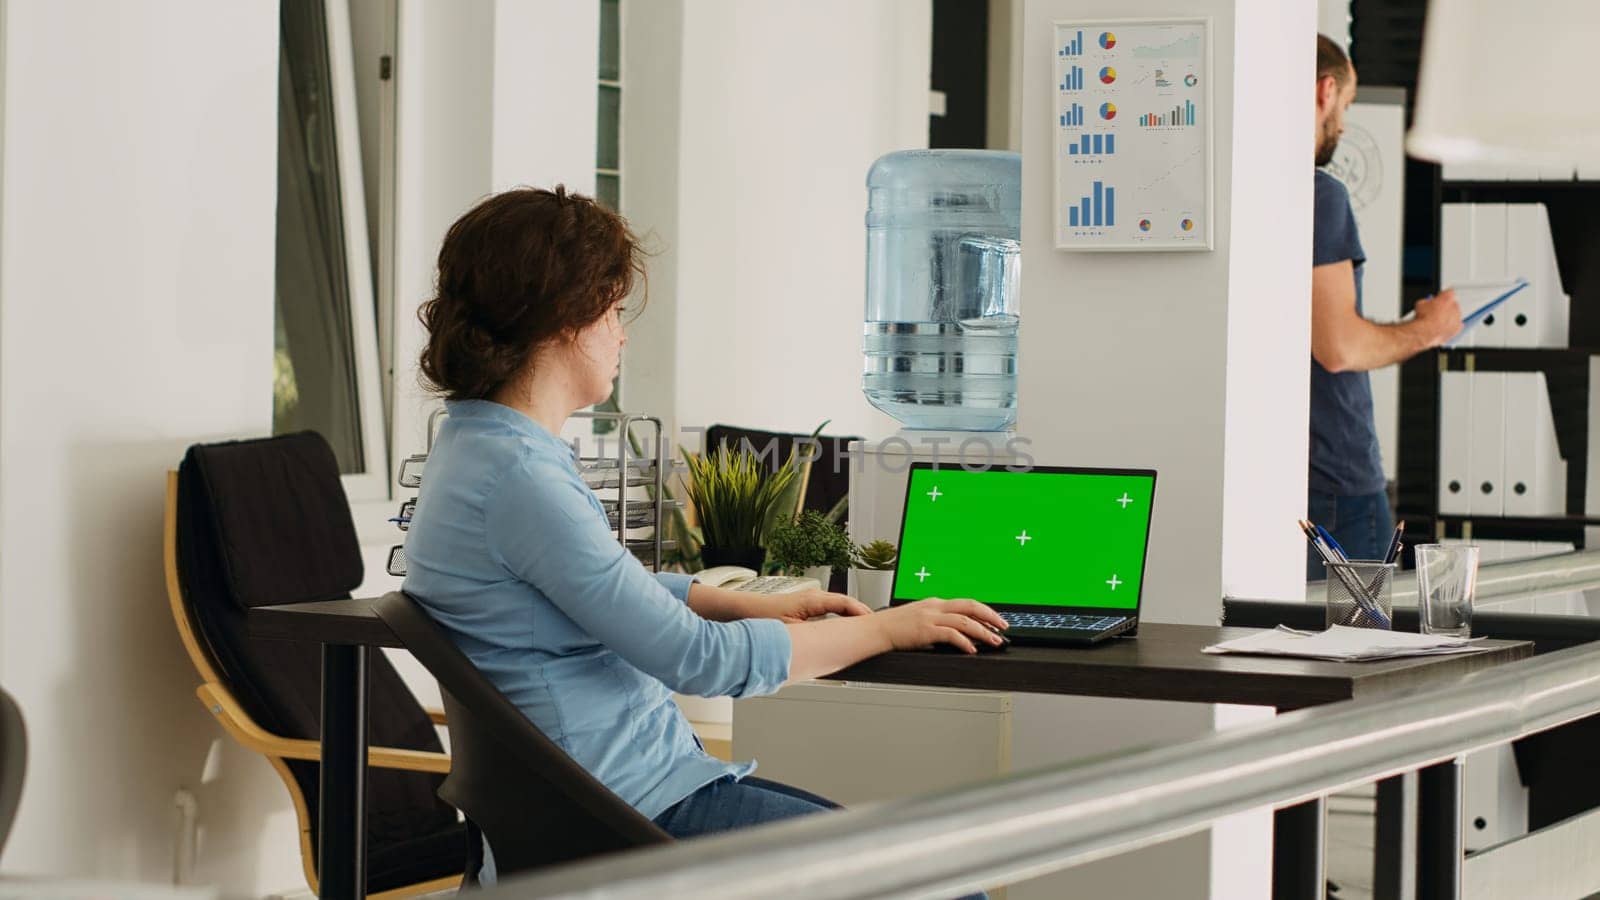 Office employee watches greenscreen on laptop display, working on small business operations at desk. Person looking at screen running isolated chromakey template with mockup copyspace.